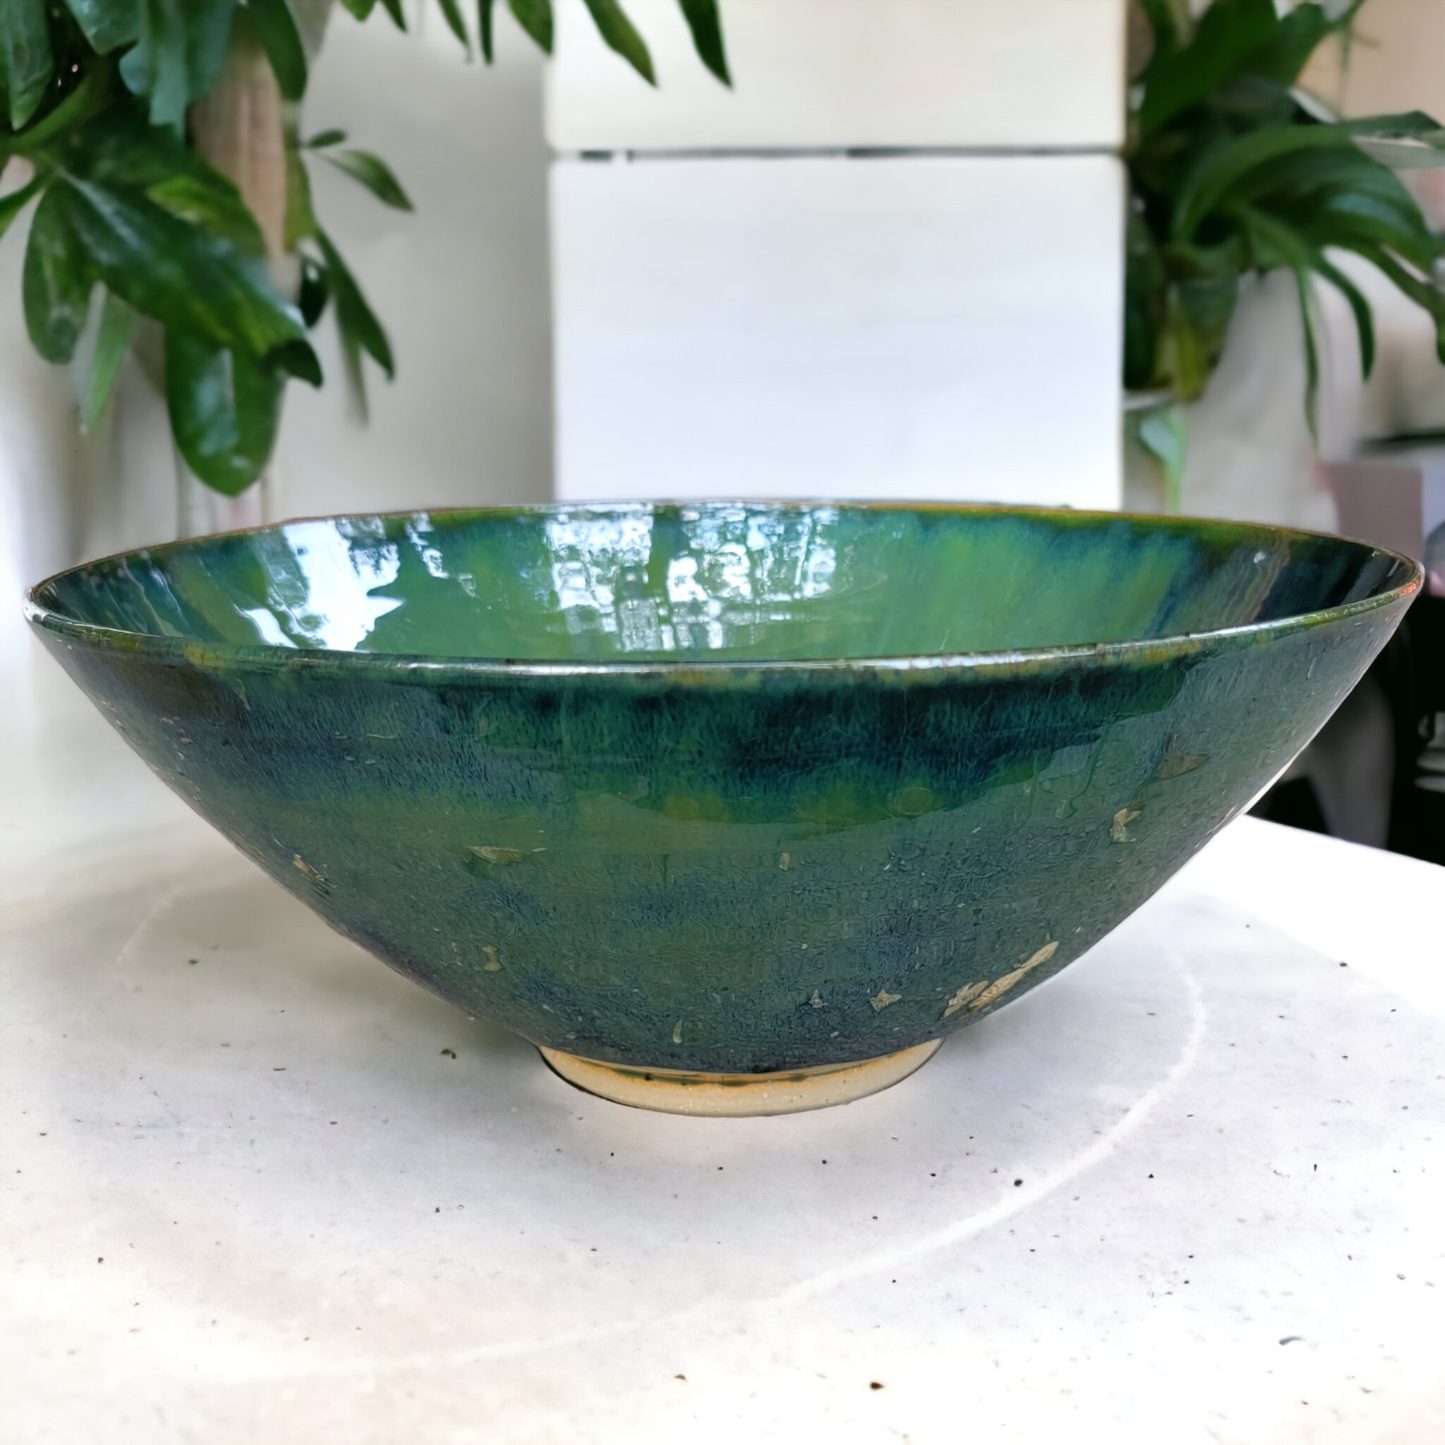 Large Mirrored Bowl - #78 - SOLD